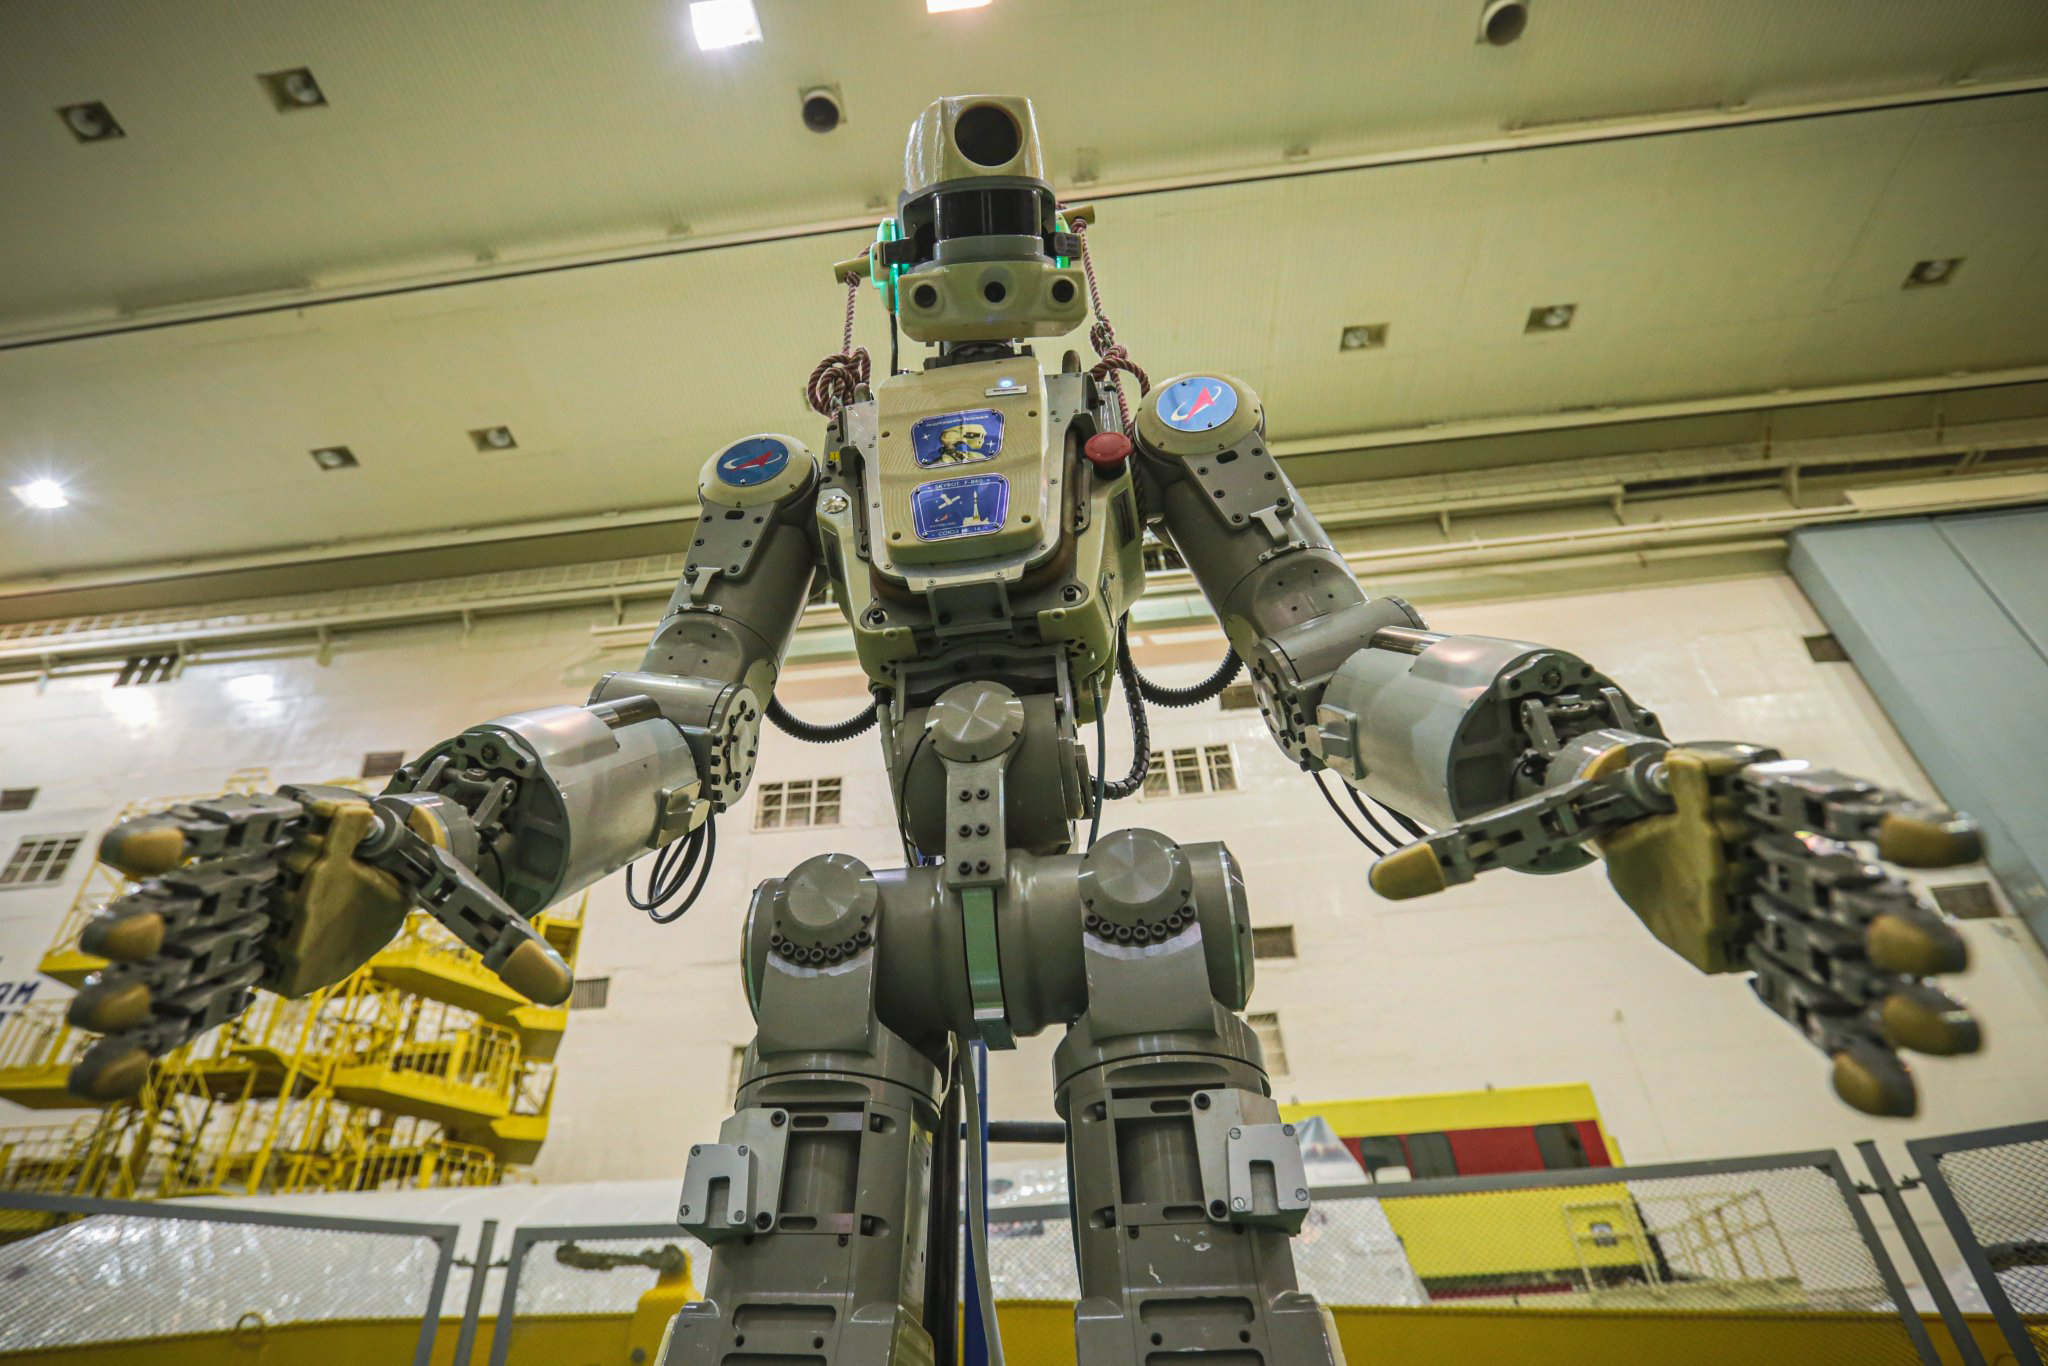 spredning kok At hoppe Meet Skybot F-850, the Humanoid Robot Russia Is Launching into Space | Space